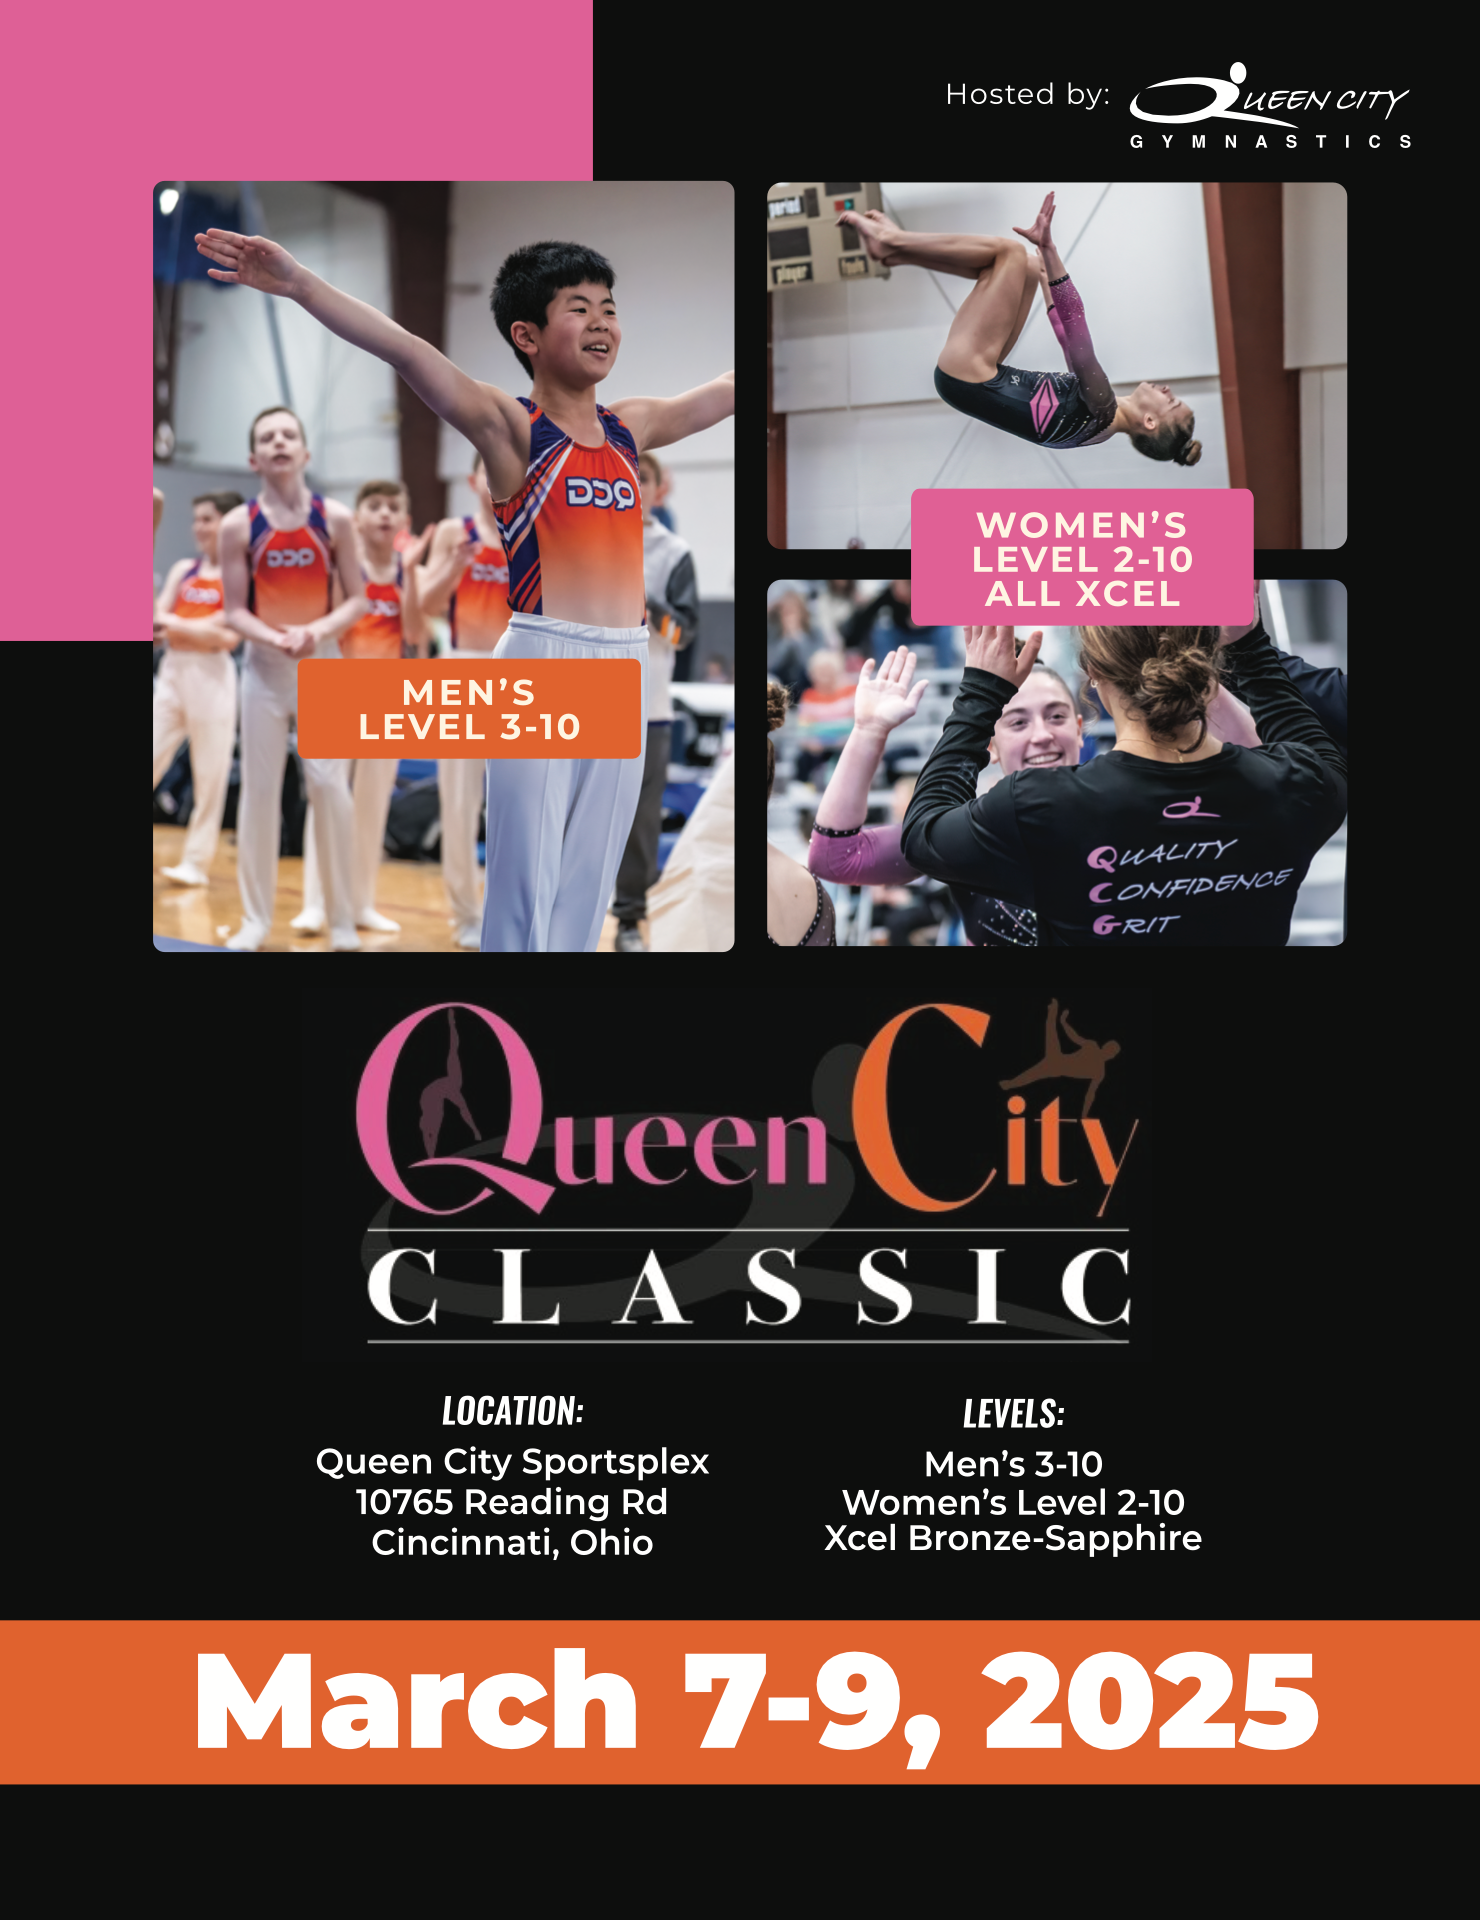 Queen City Classic 2025 Save the Date for March 7-9, 2025